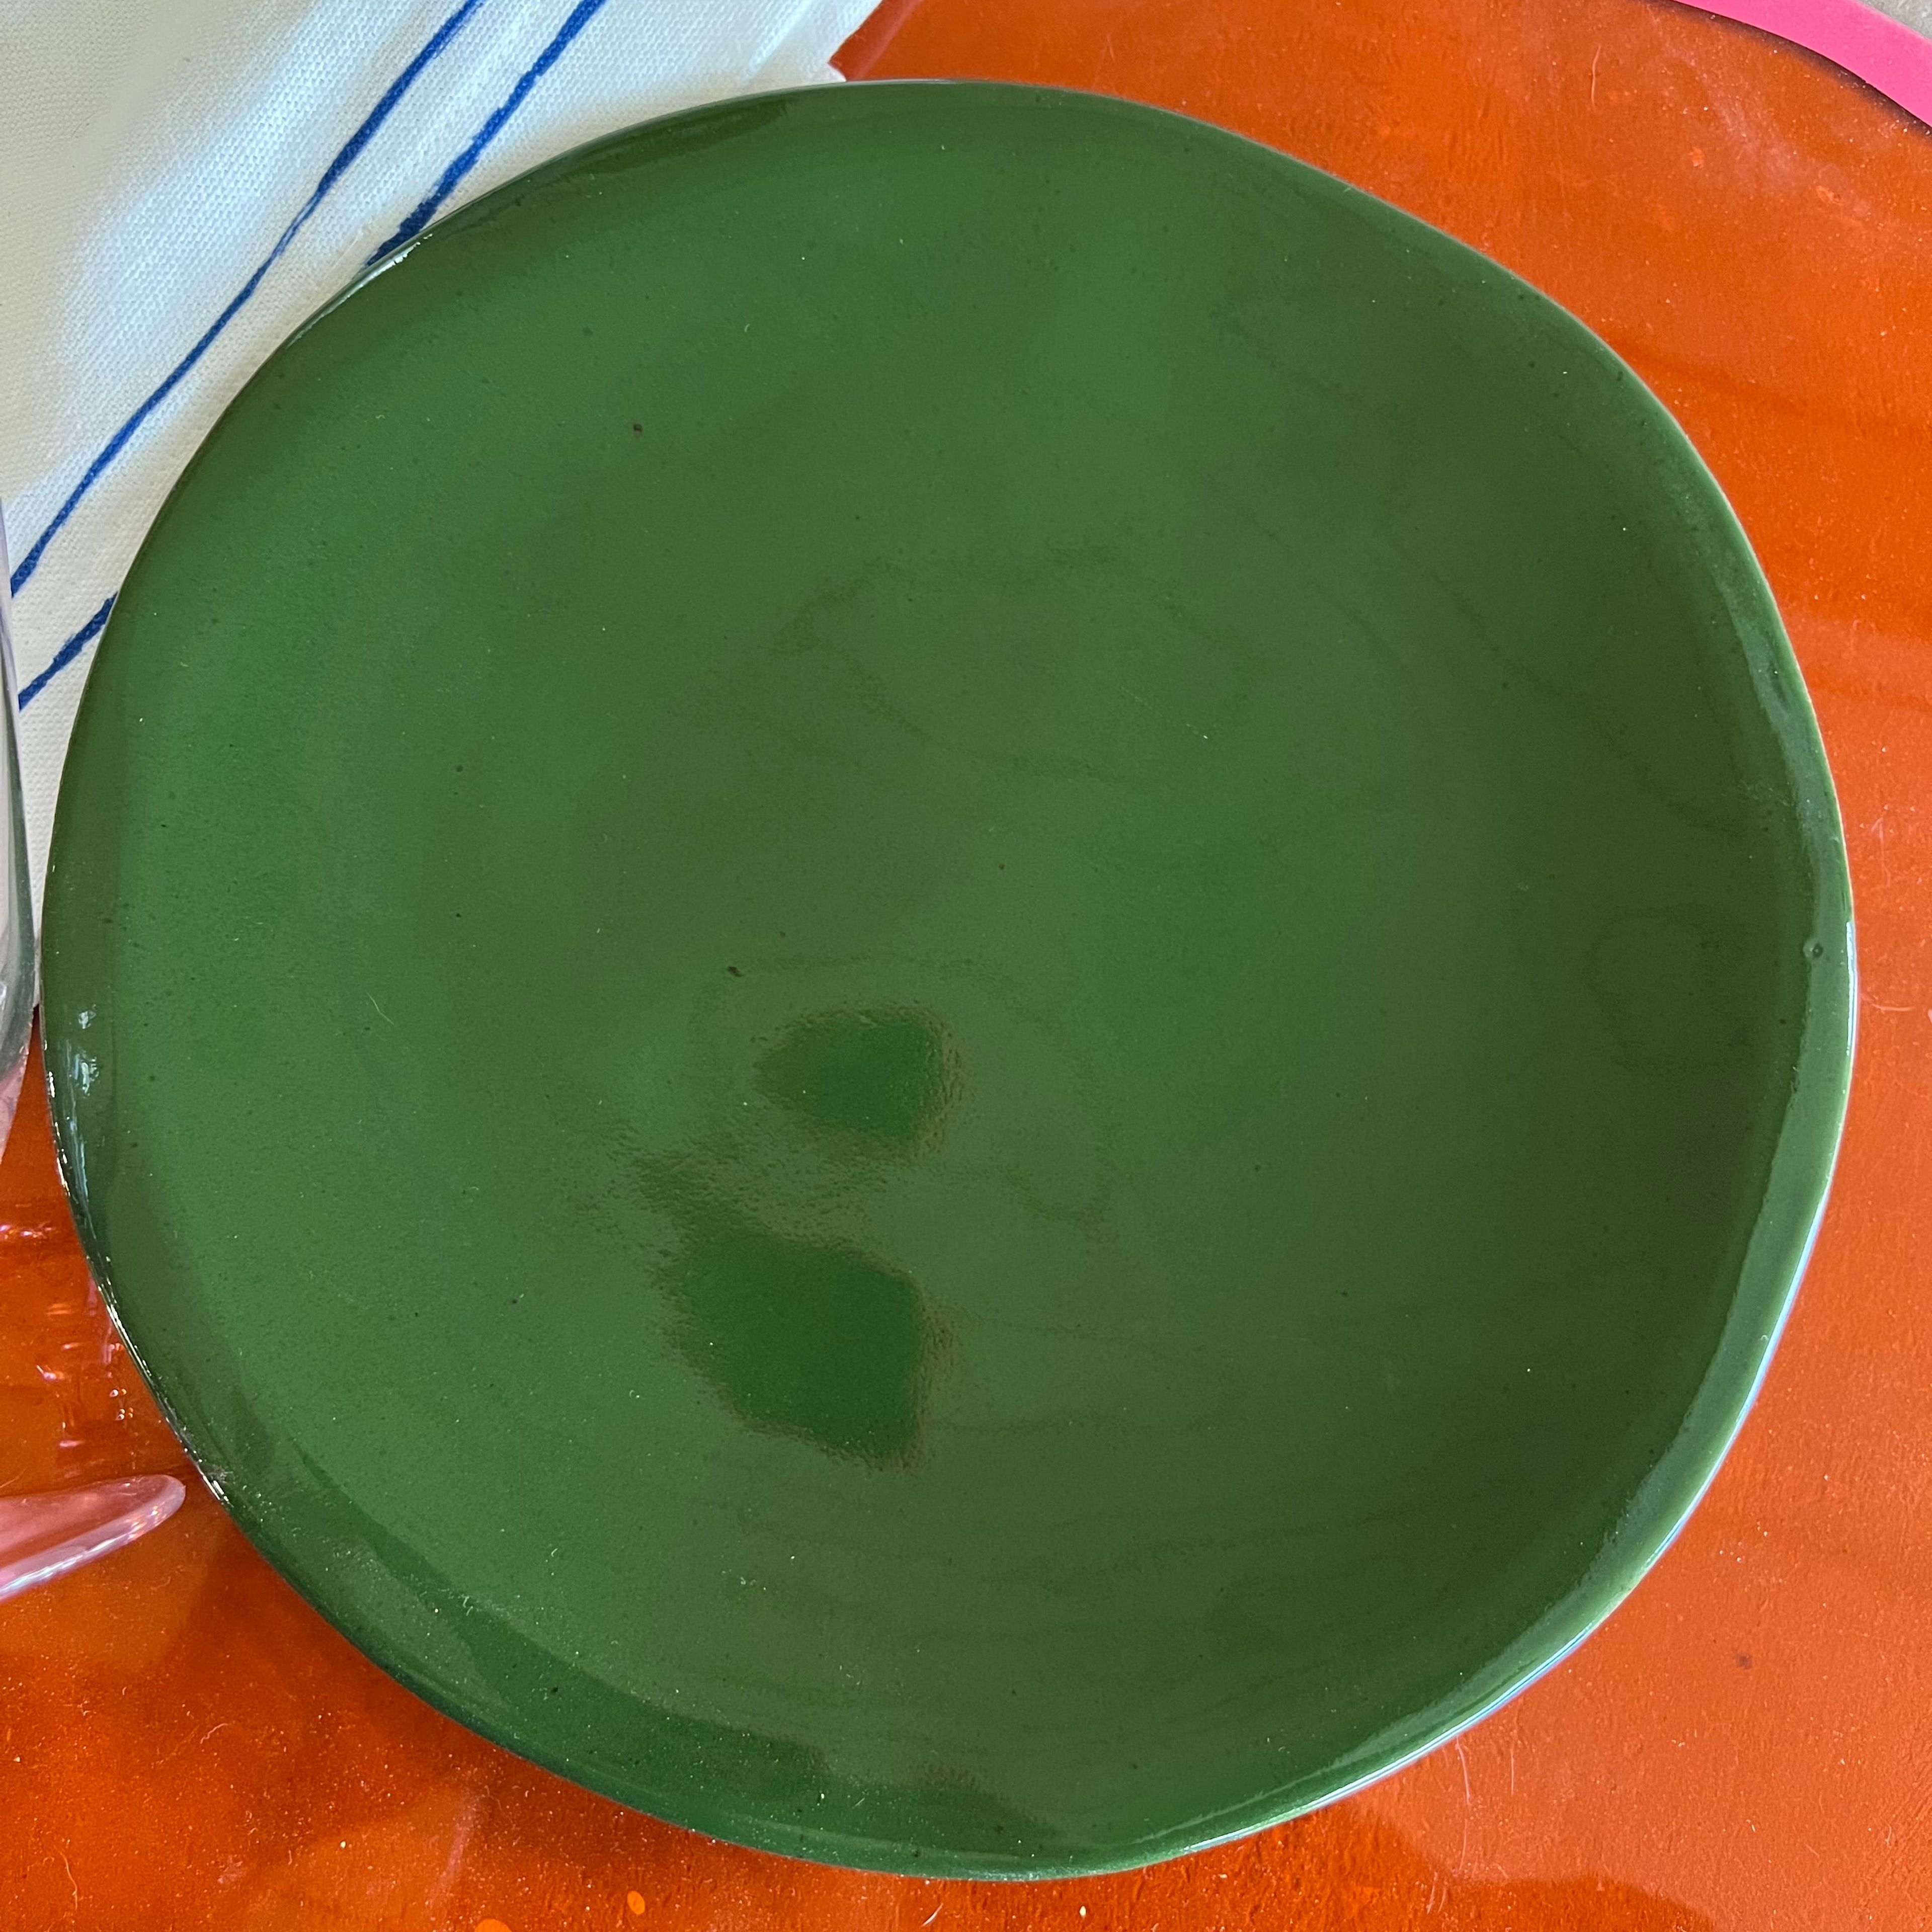 Glossy Clover Plate